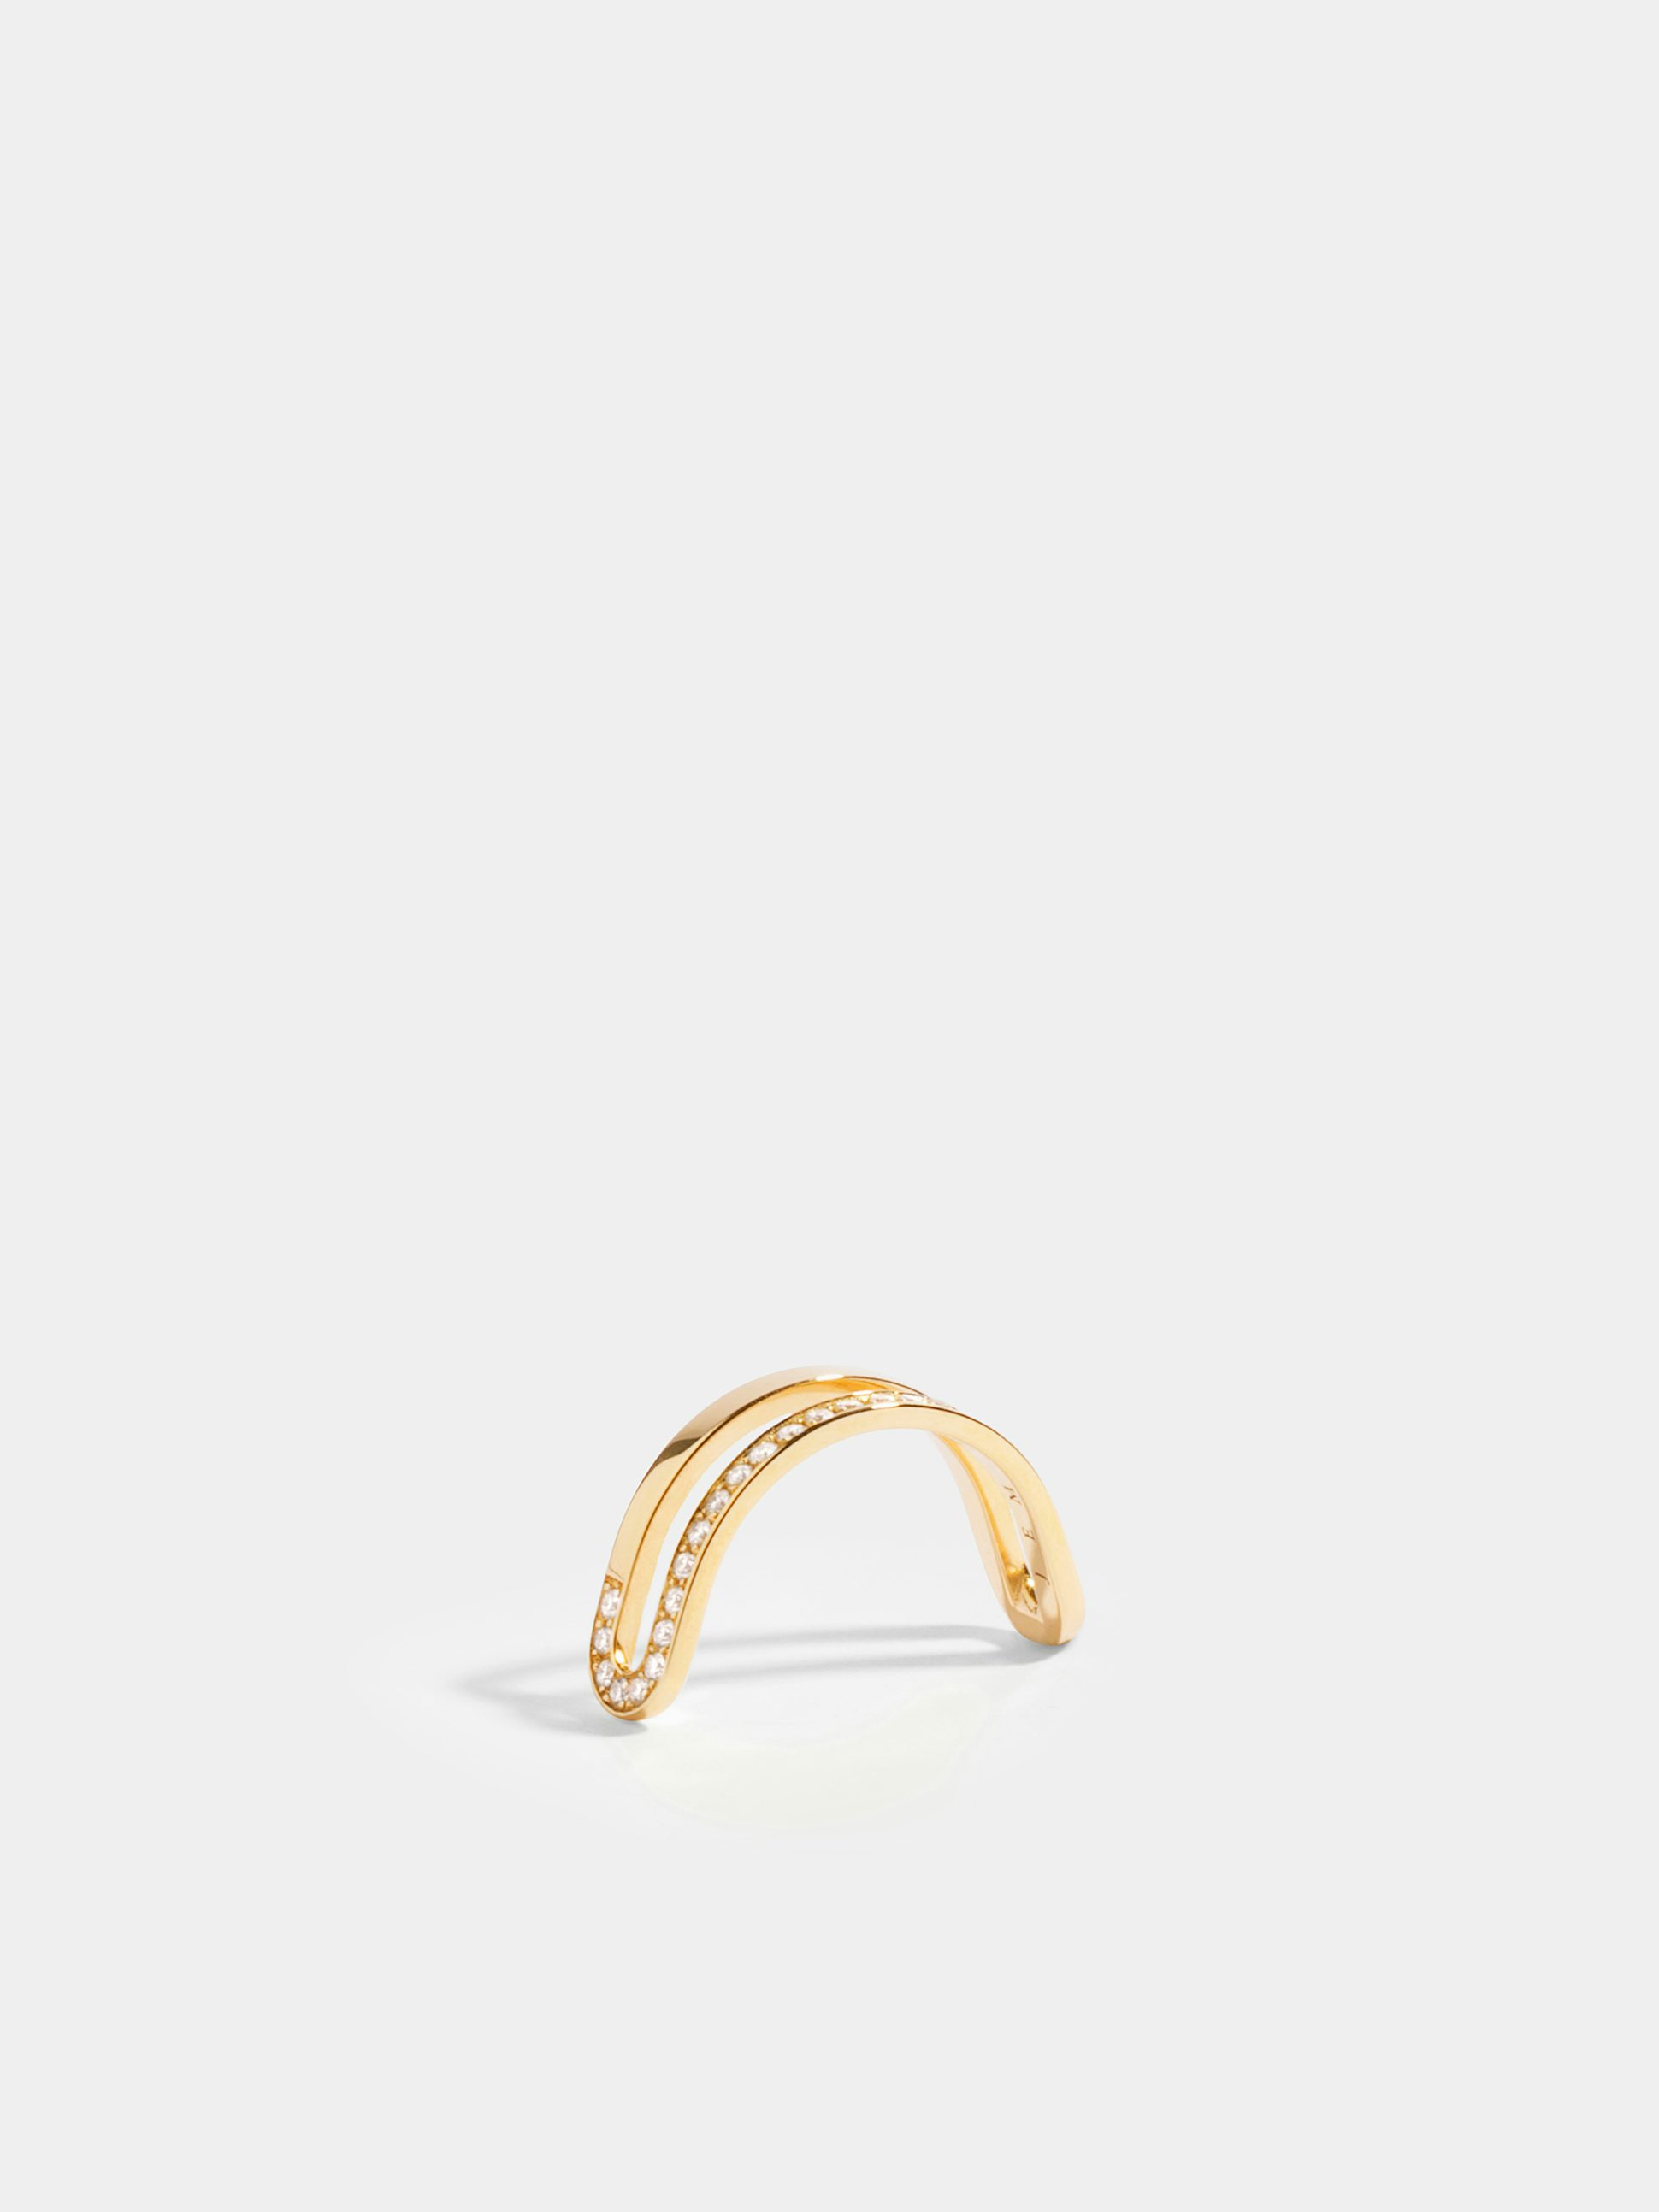 Étreintes simple half-ring in 18k Fairmined ethical yellow gold, paved with lab-grown diamonds on one line.